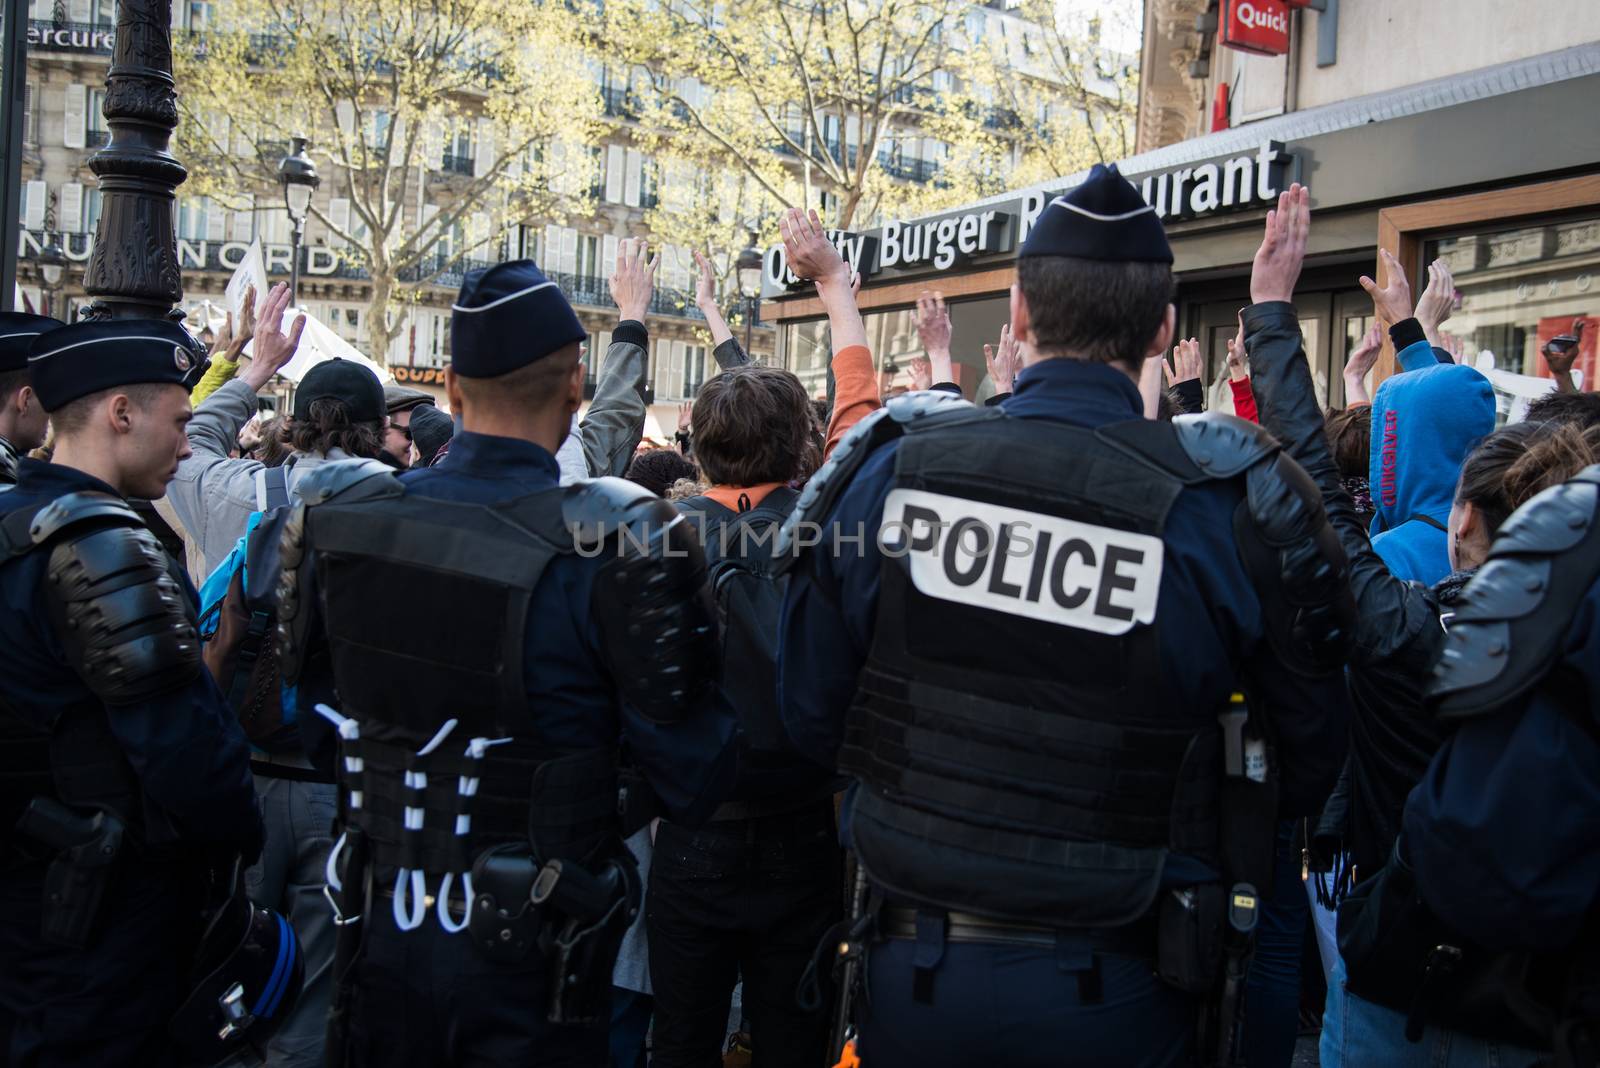 FRANCE, Paris : Demonstrators part of the Nuit Debout movement face police officers during a protest against split shifts and to demand wage increases in front of a fast food restaurant in Paris on April 20, 2016.